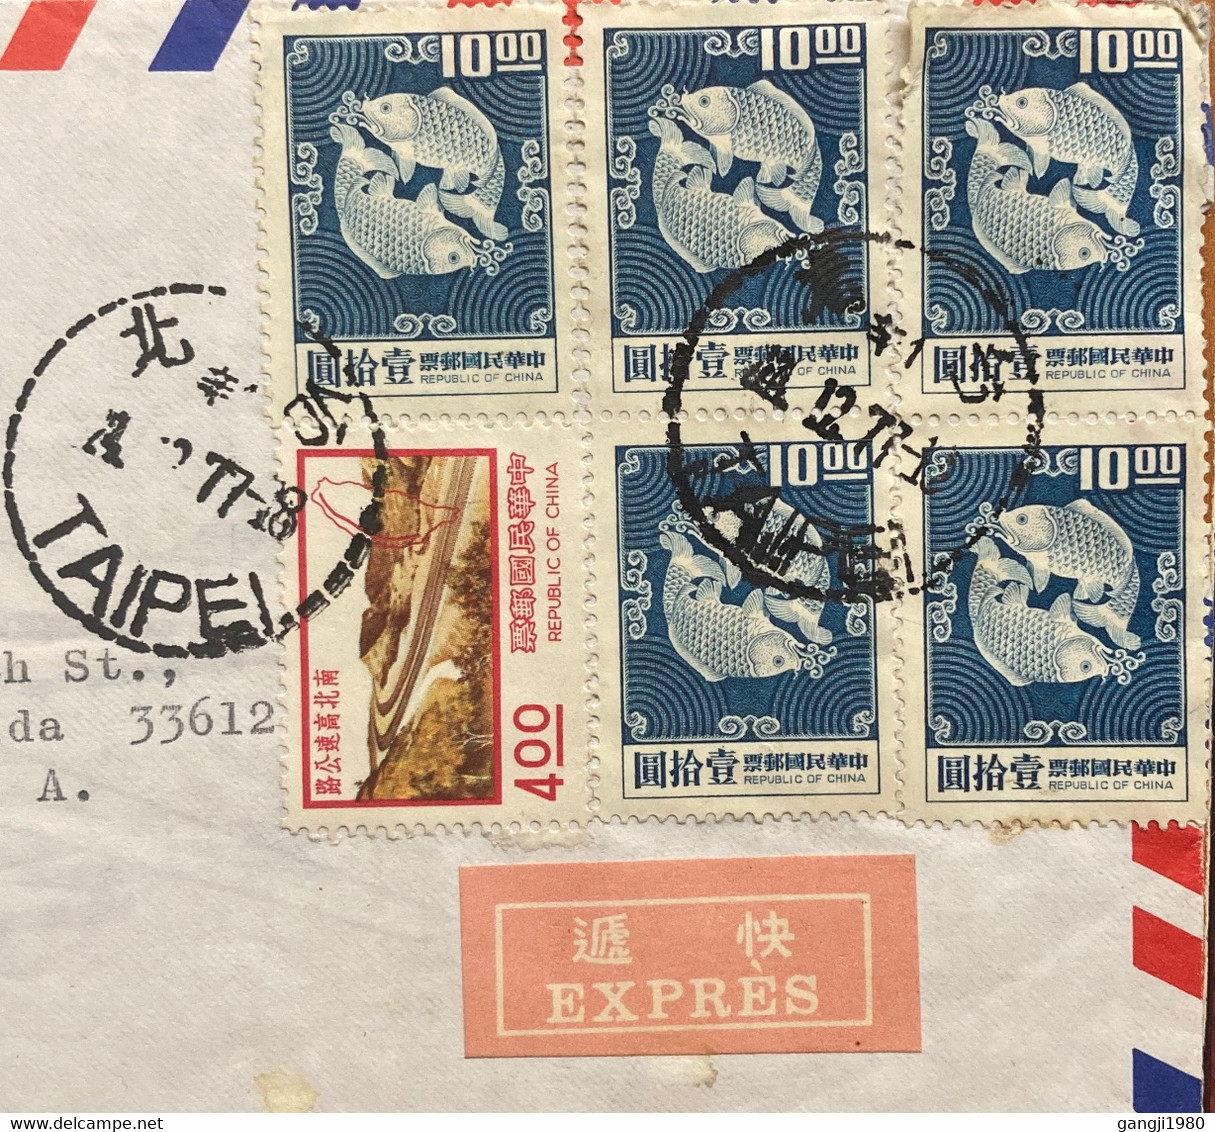 CHINA TAIWAN-1977, VIGNETTE “EXPRESS” LABEL USED COVER TO USA ,TUNG FOOK TRADING CO.ADVT PICTURE MATCHING FISH, SAME STA - Cartas & Documentos